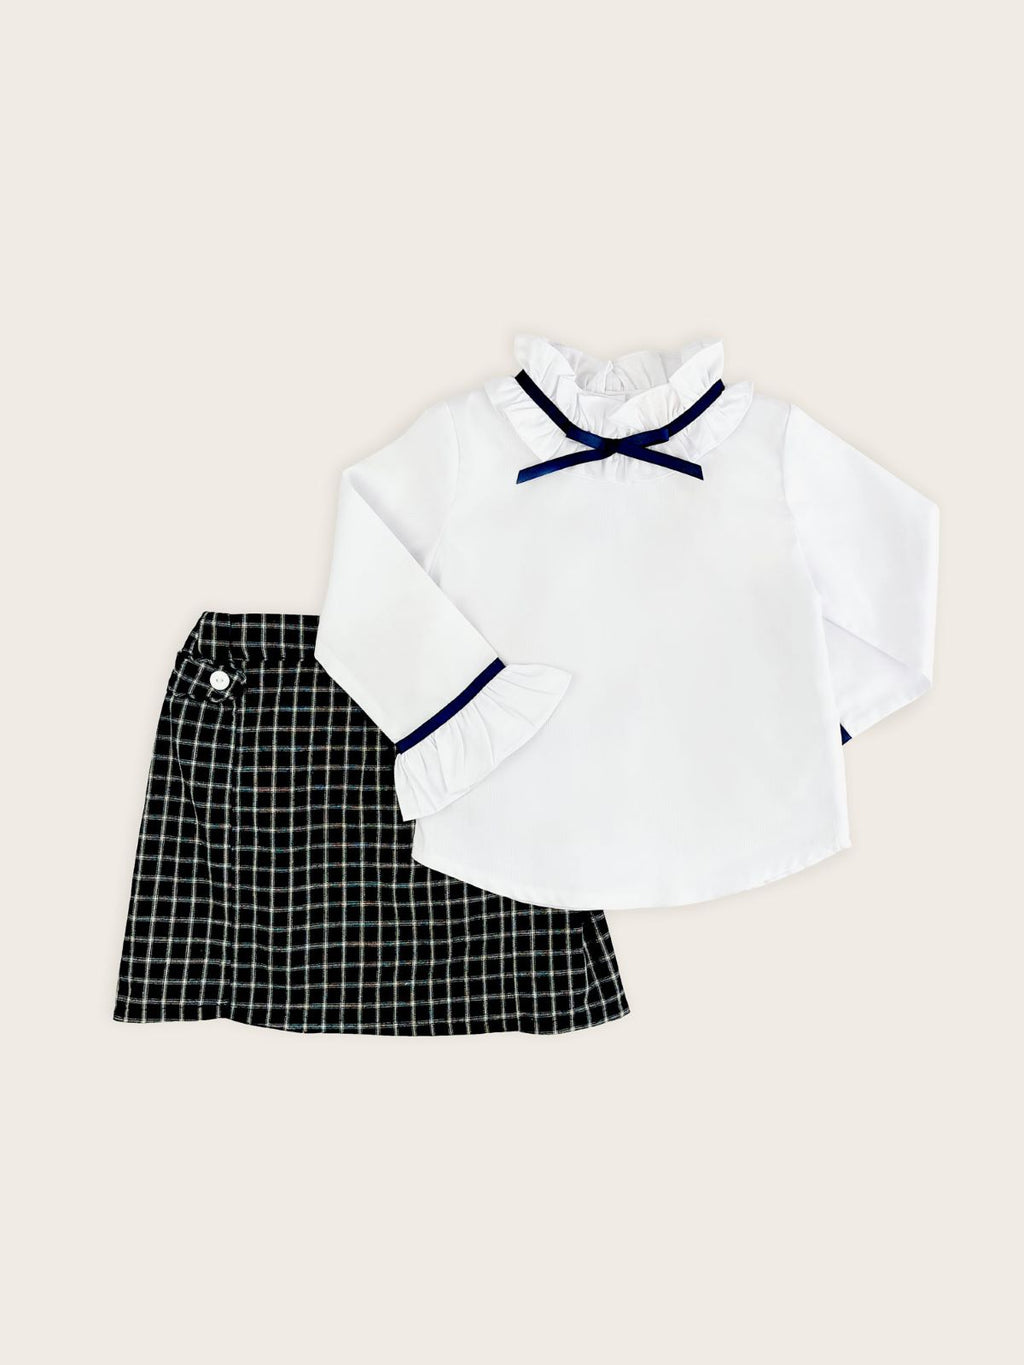 Girls white blouse with blue grosgrain ribbon collar paired with French Navy Check skirt